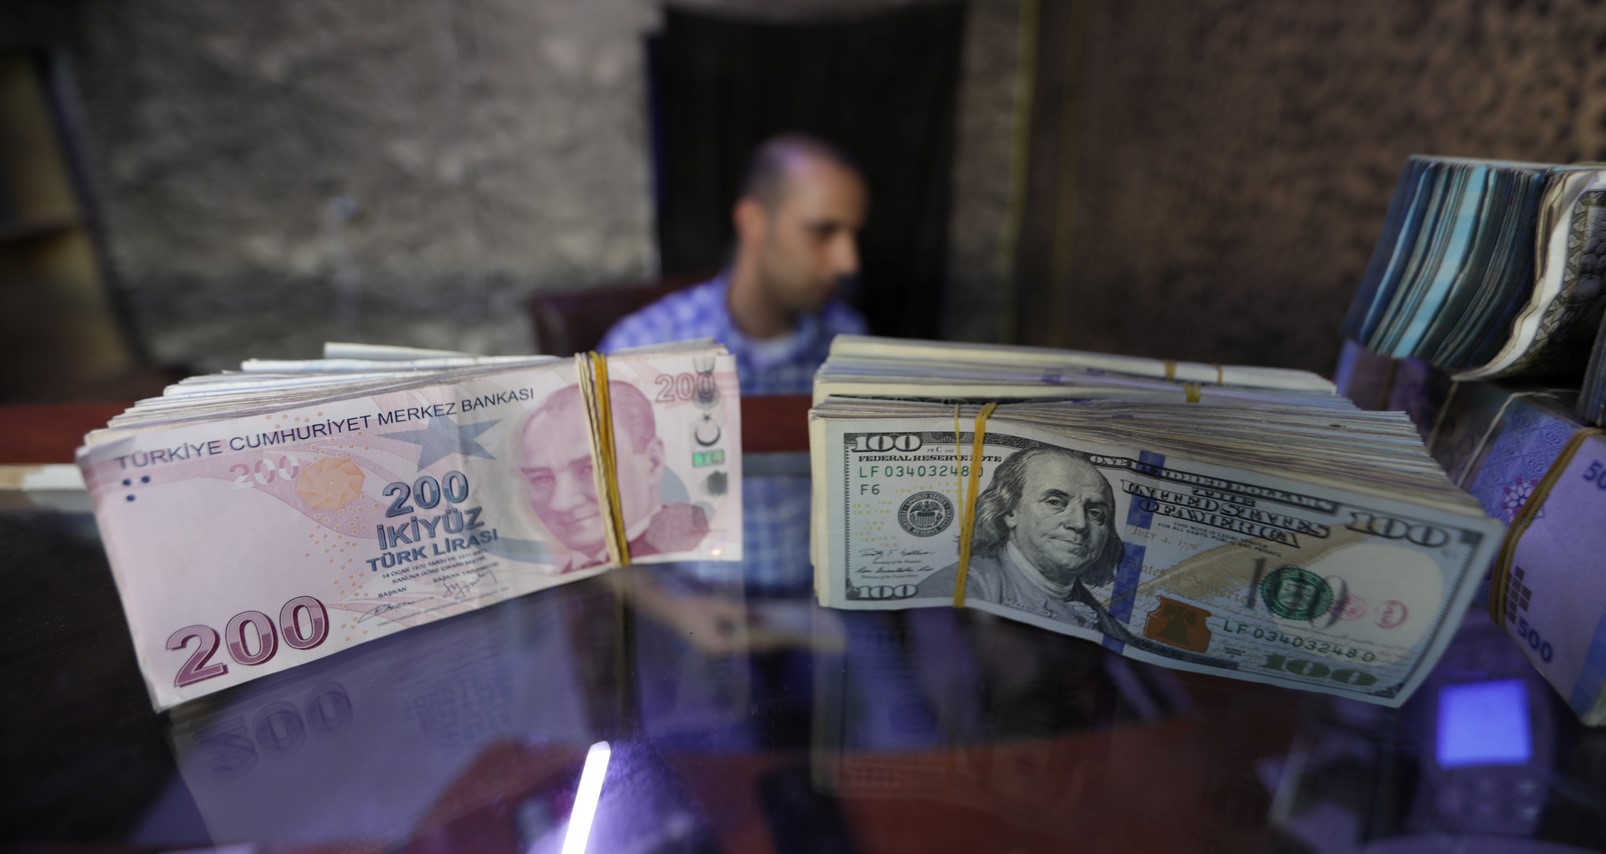 Turkish lira hits weakest level this year after U.S. inflation